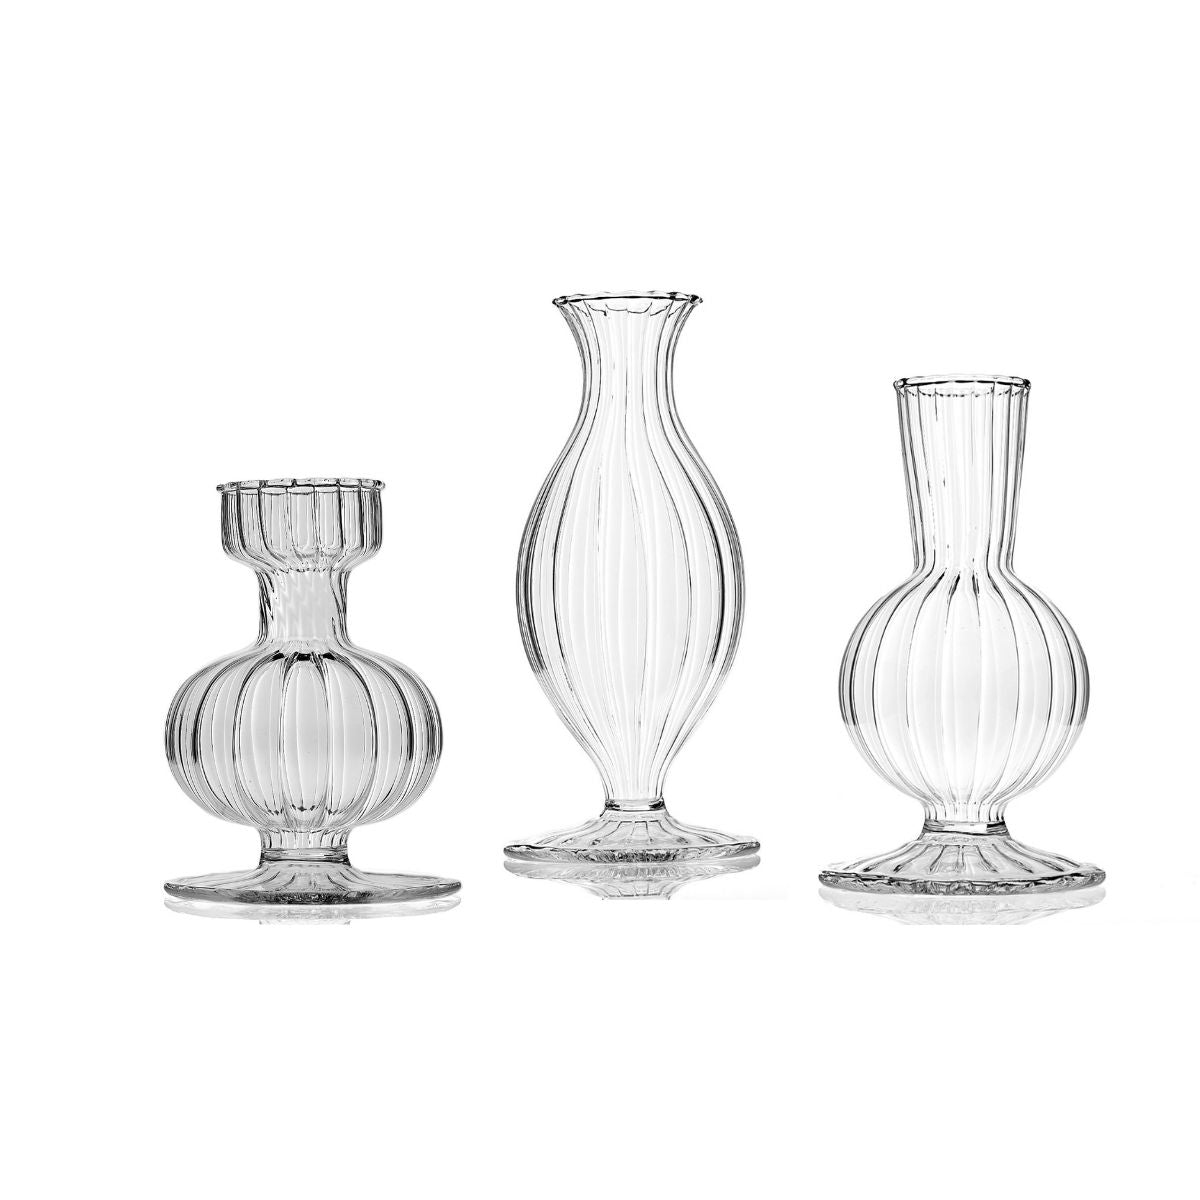 Small Boutique Vases, Set of 3